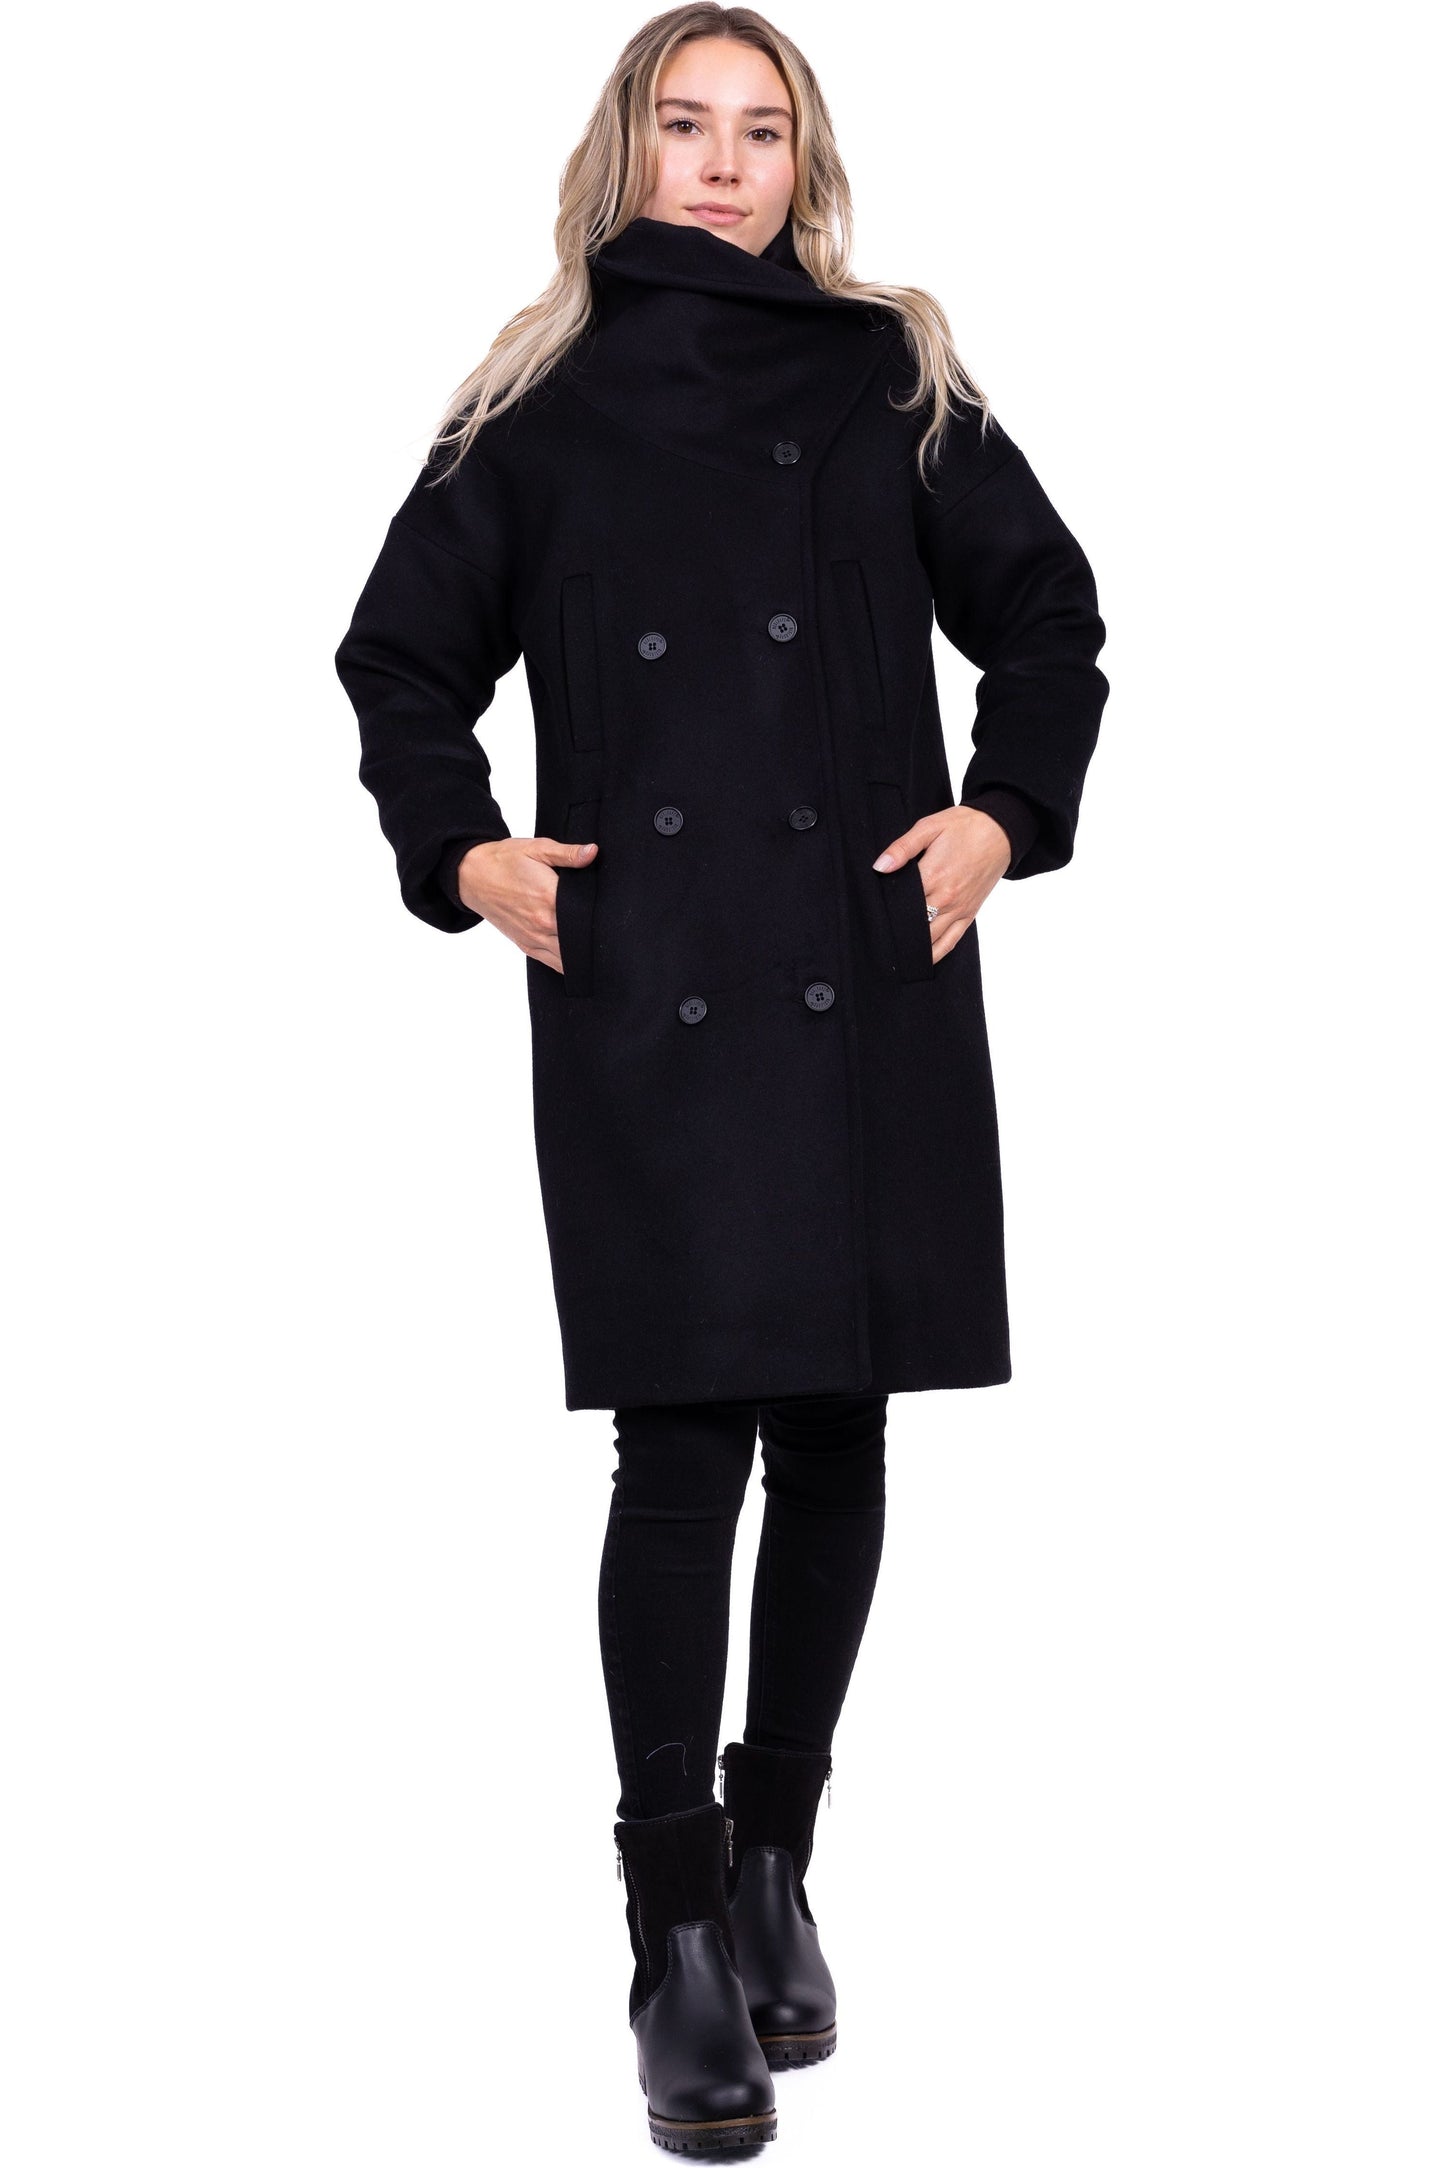 Desloups women's oversized double-breasted winter coat in 100% wool and lined